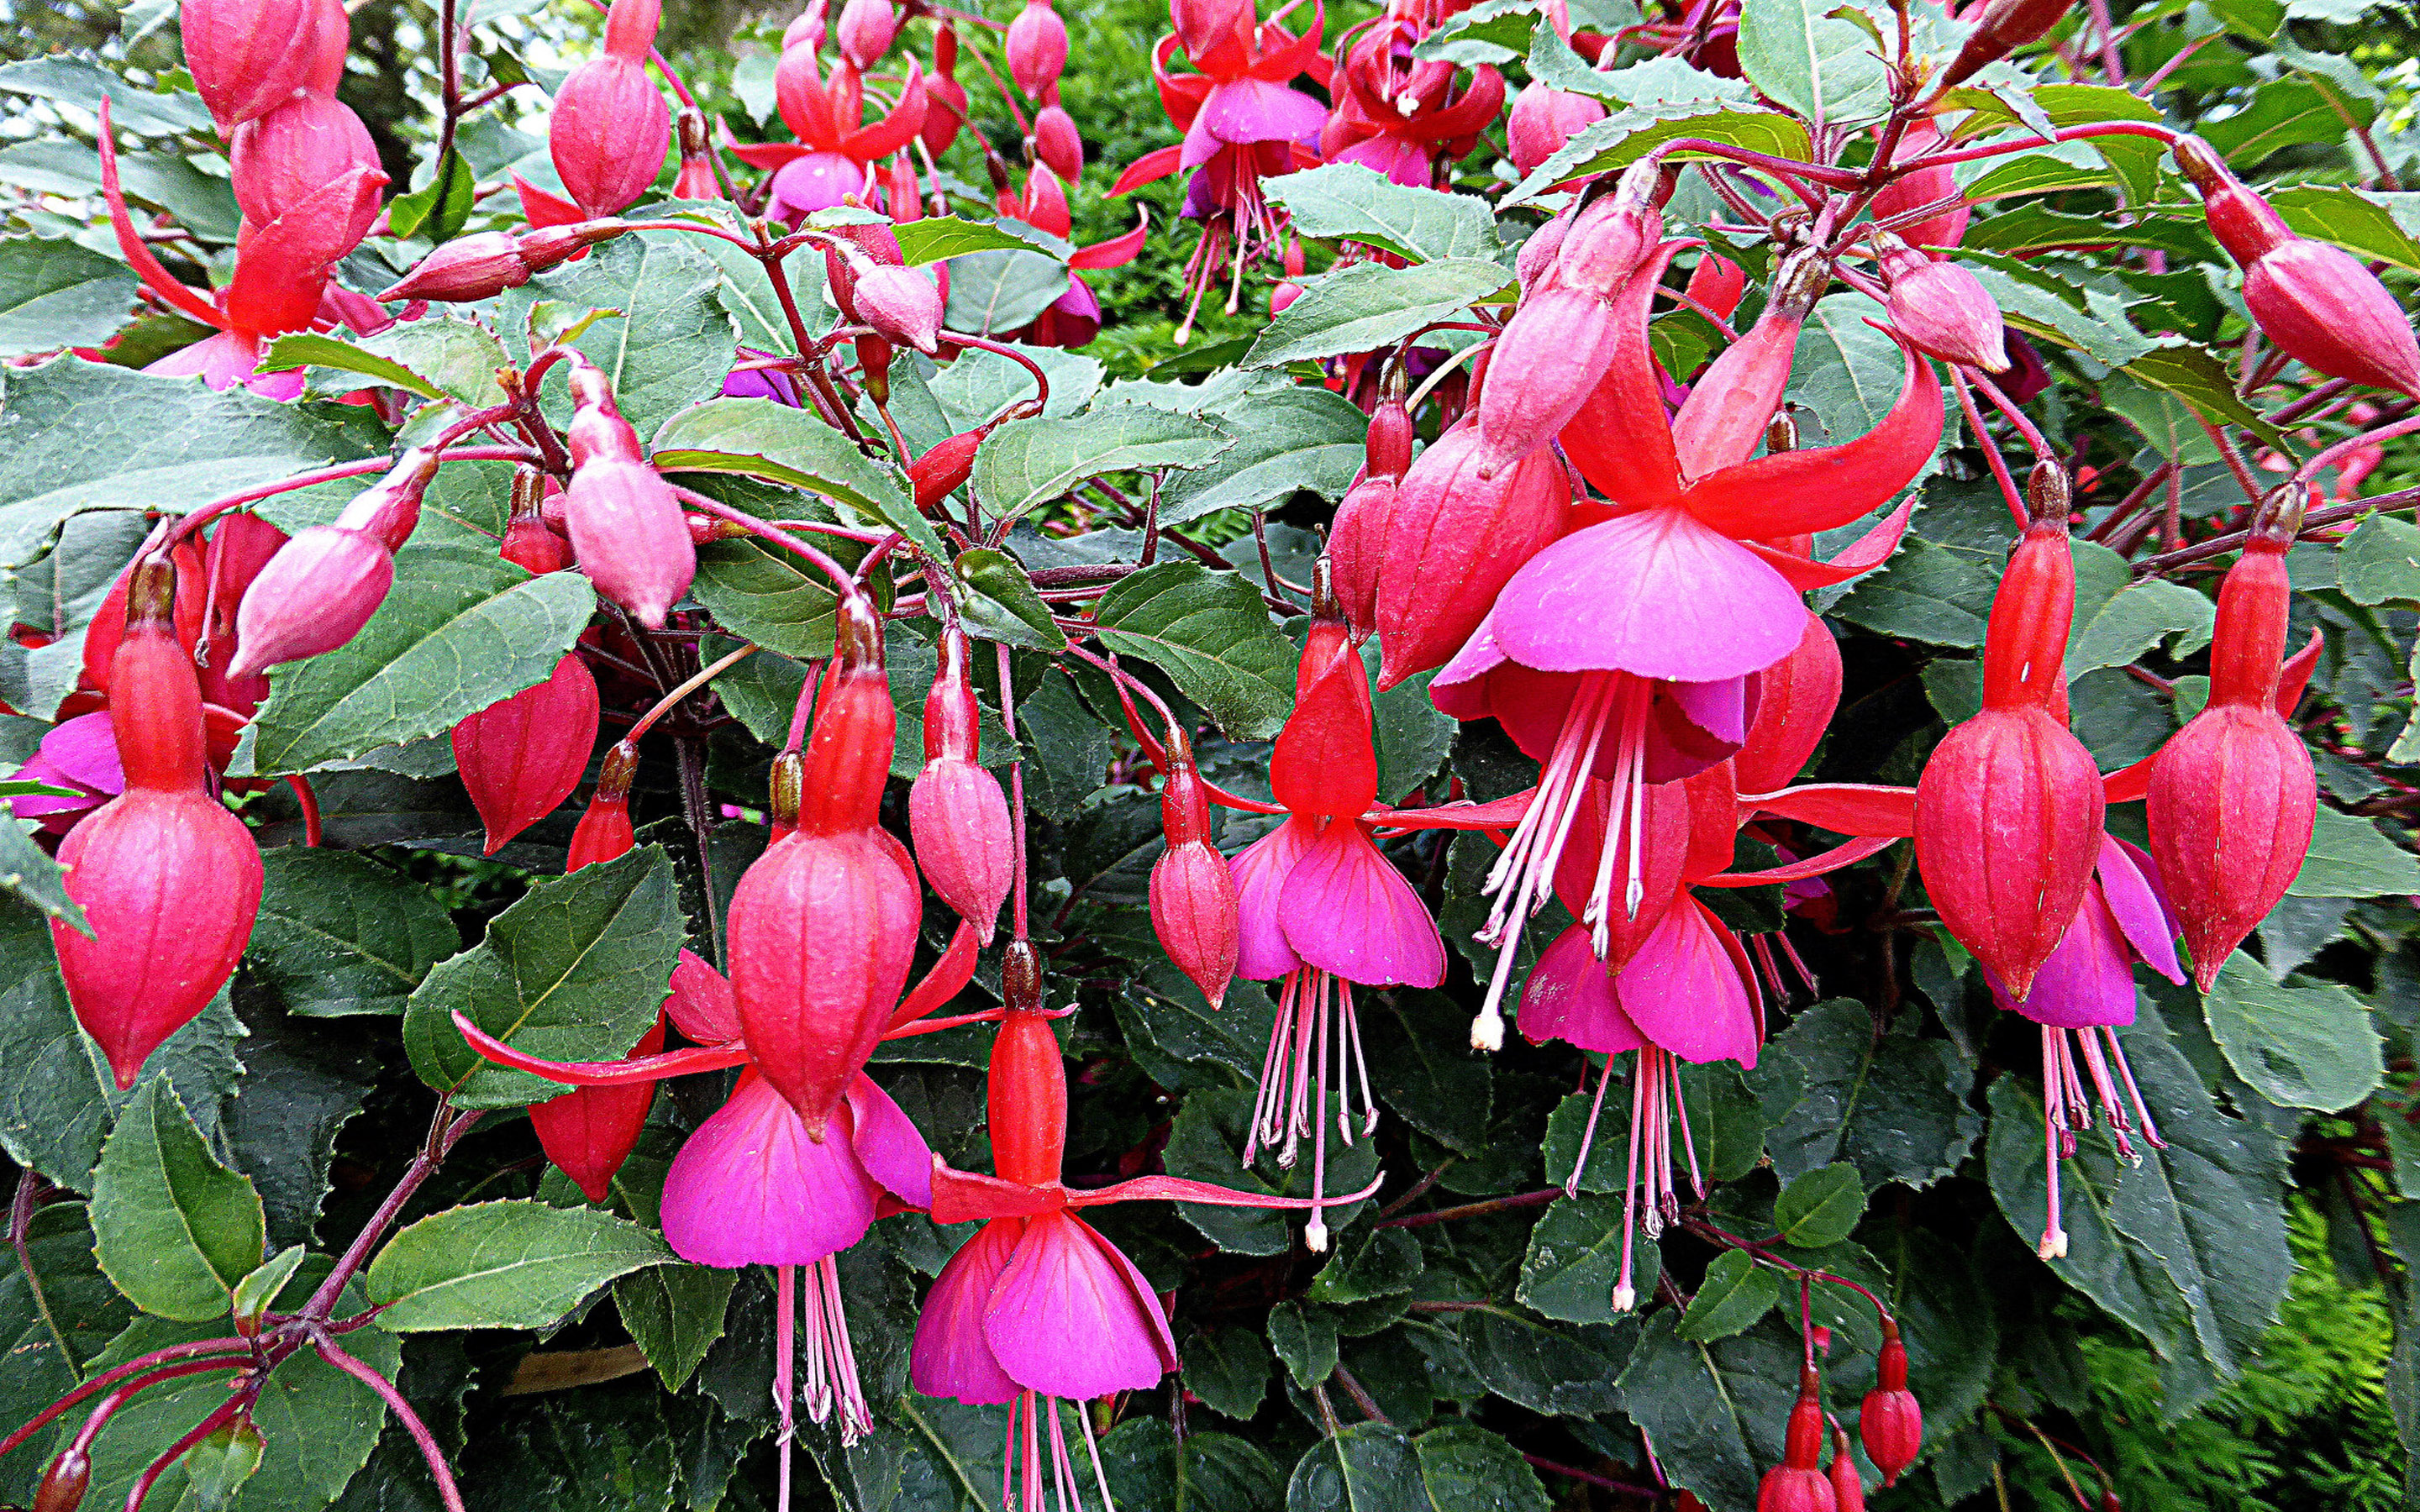 Red Fuchsia Is A Genus Of Flowering Plants Shrubs Or Small Trees